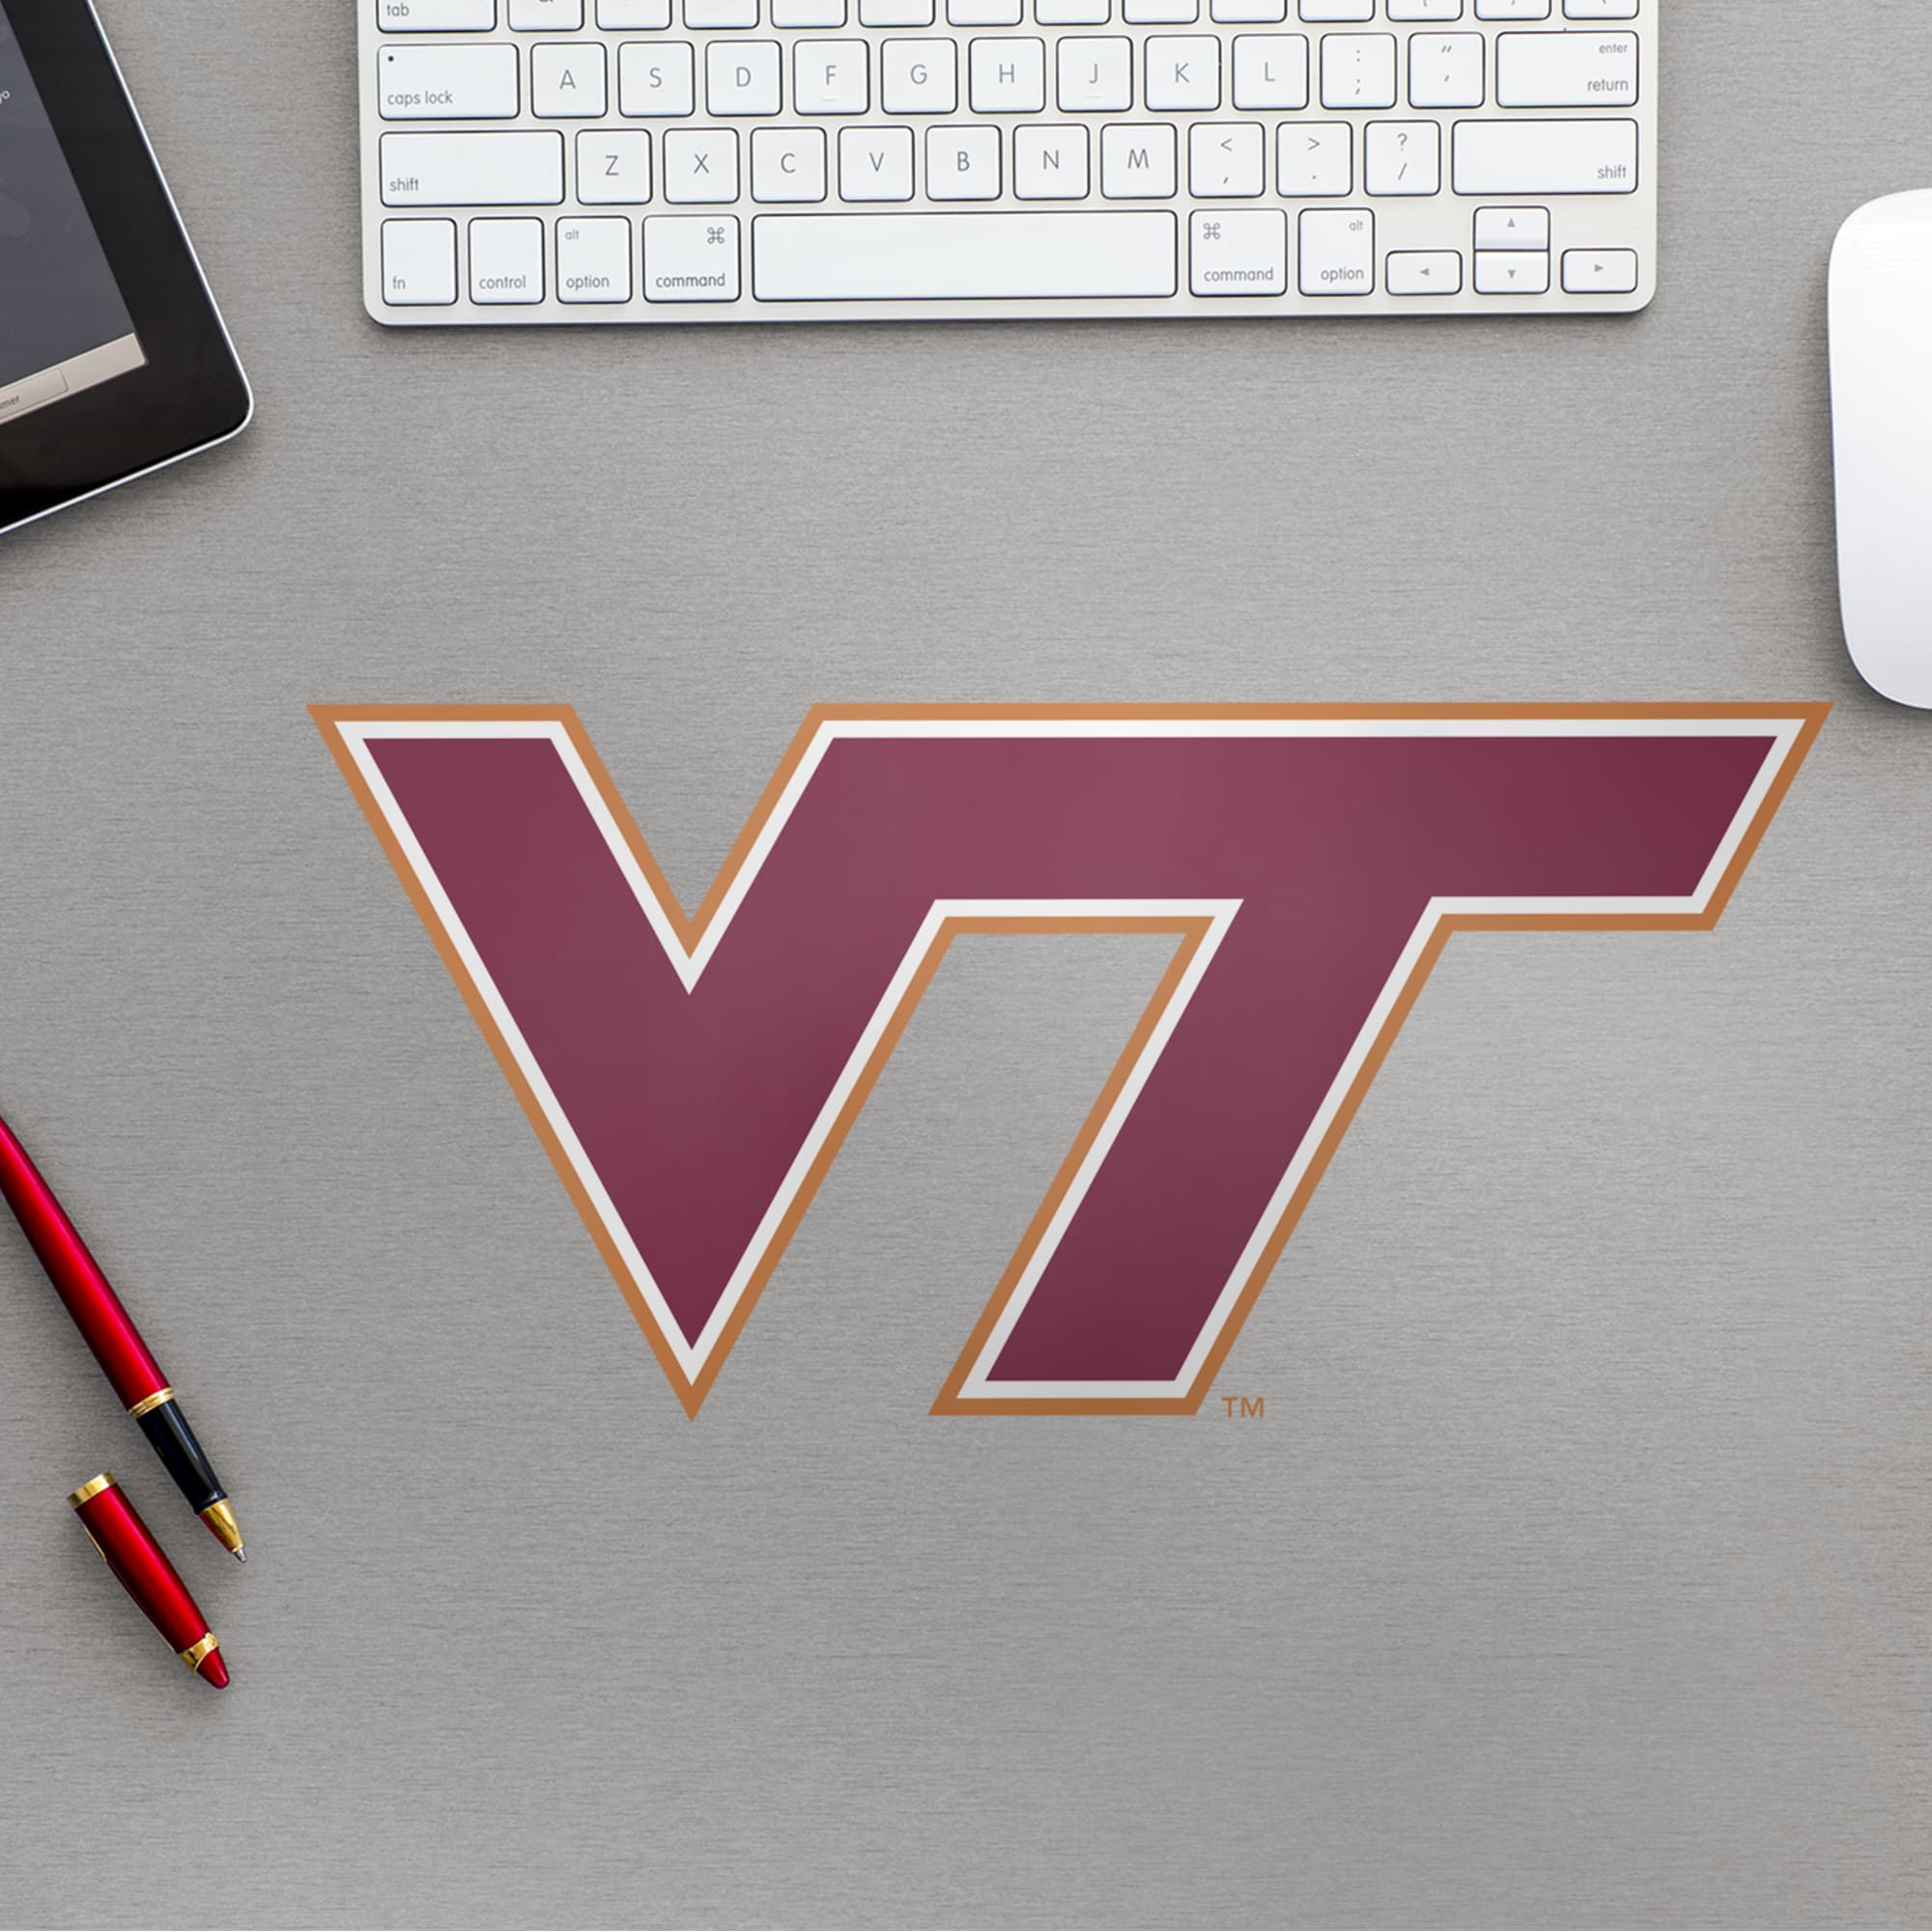 Virginia Tech Hokies: Logo - Officially Licensed Removable Wall Decal 14.0"W x 6.5"H by Fathead | Vinyl